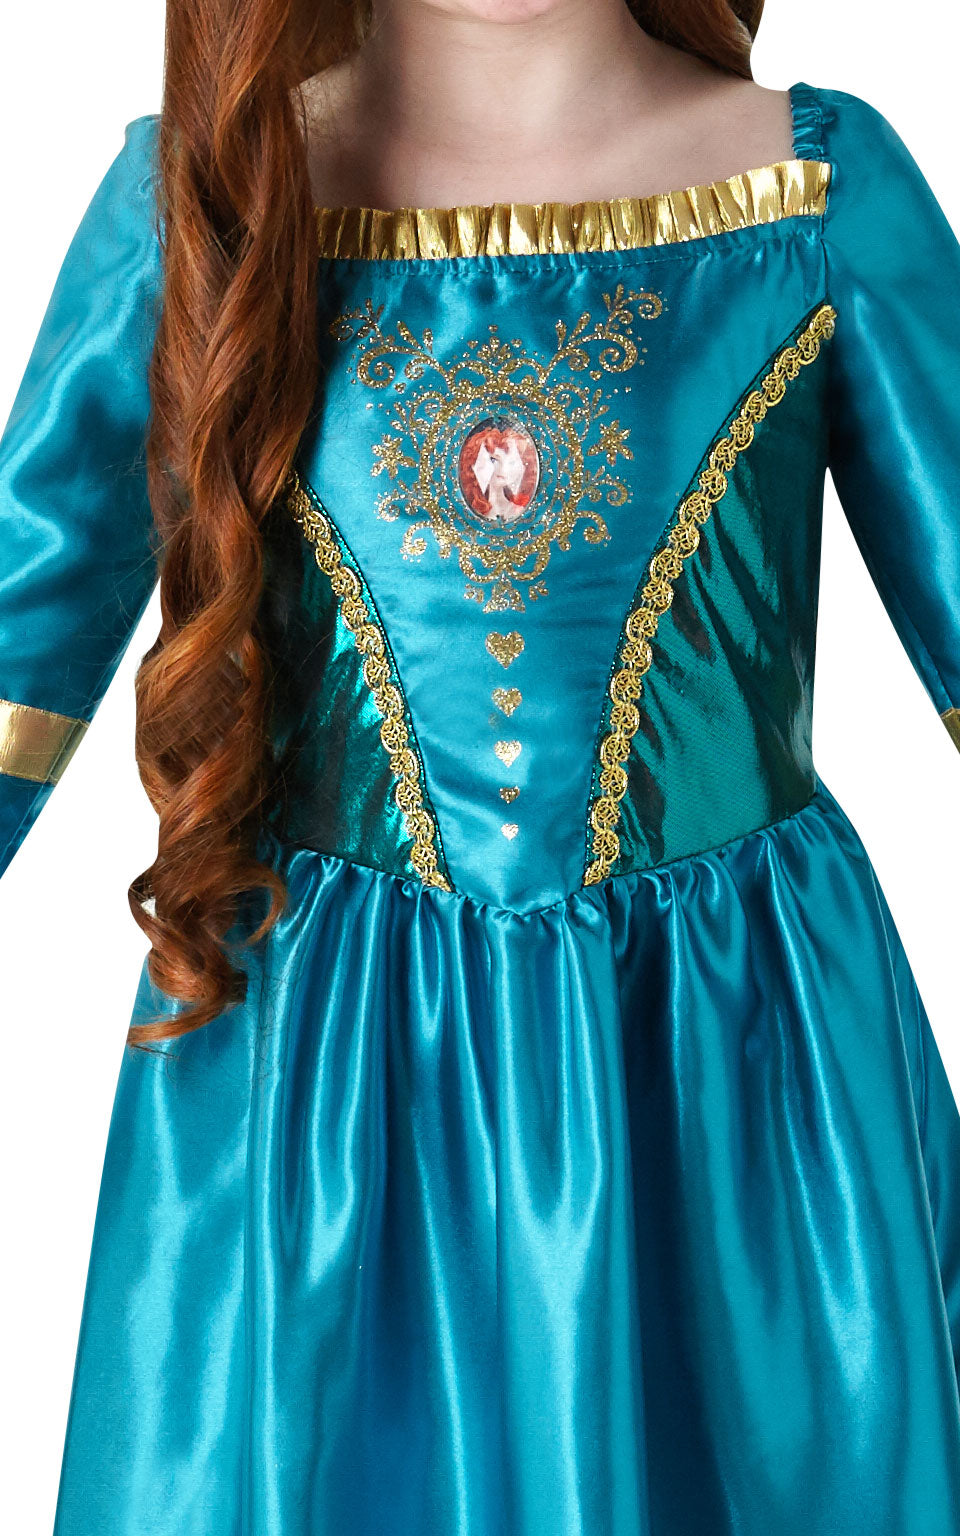 Gem Princess Merida Costume includes satin dress with gold trim, satin bodice and character gem motif and satin skirt with organza shimmer peplum and sparkly glitter detail.